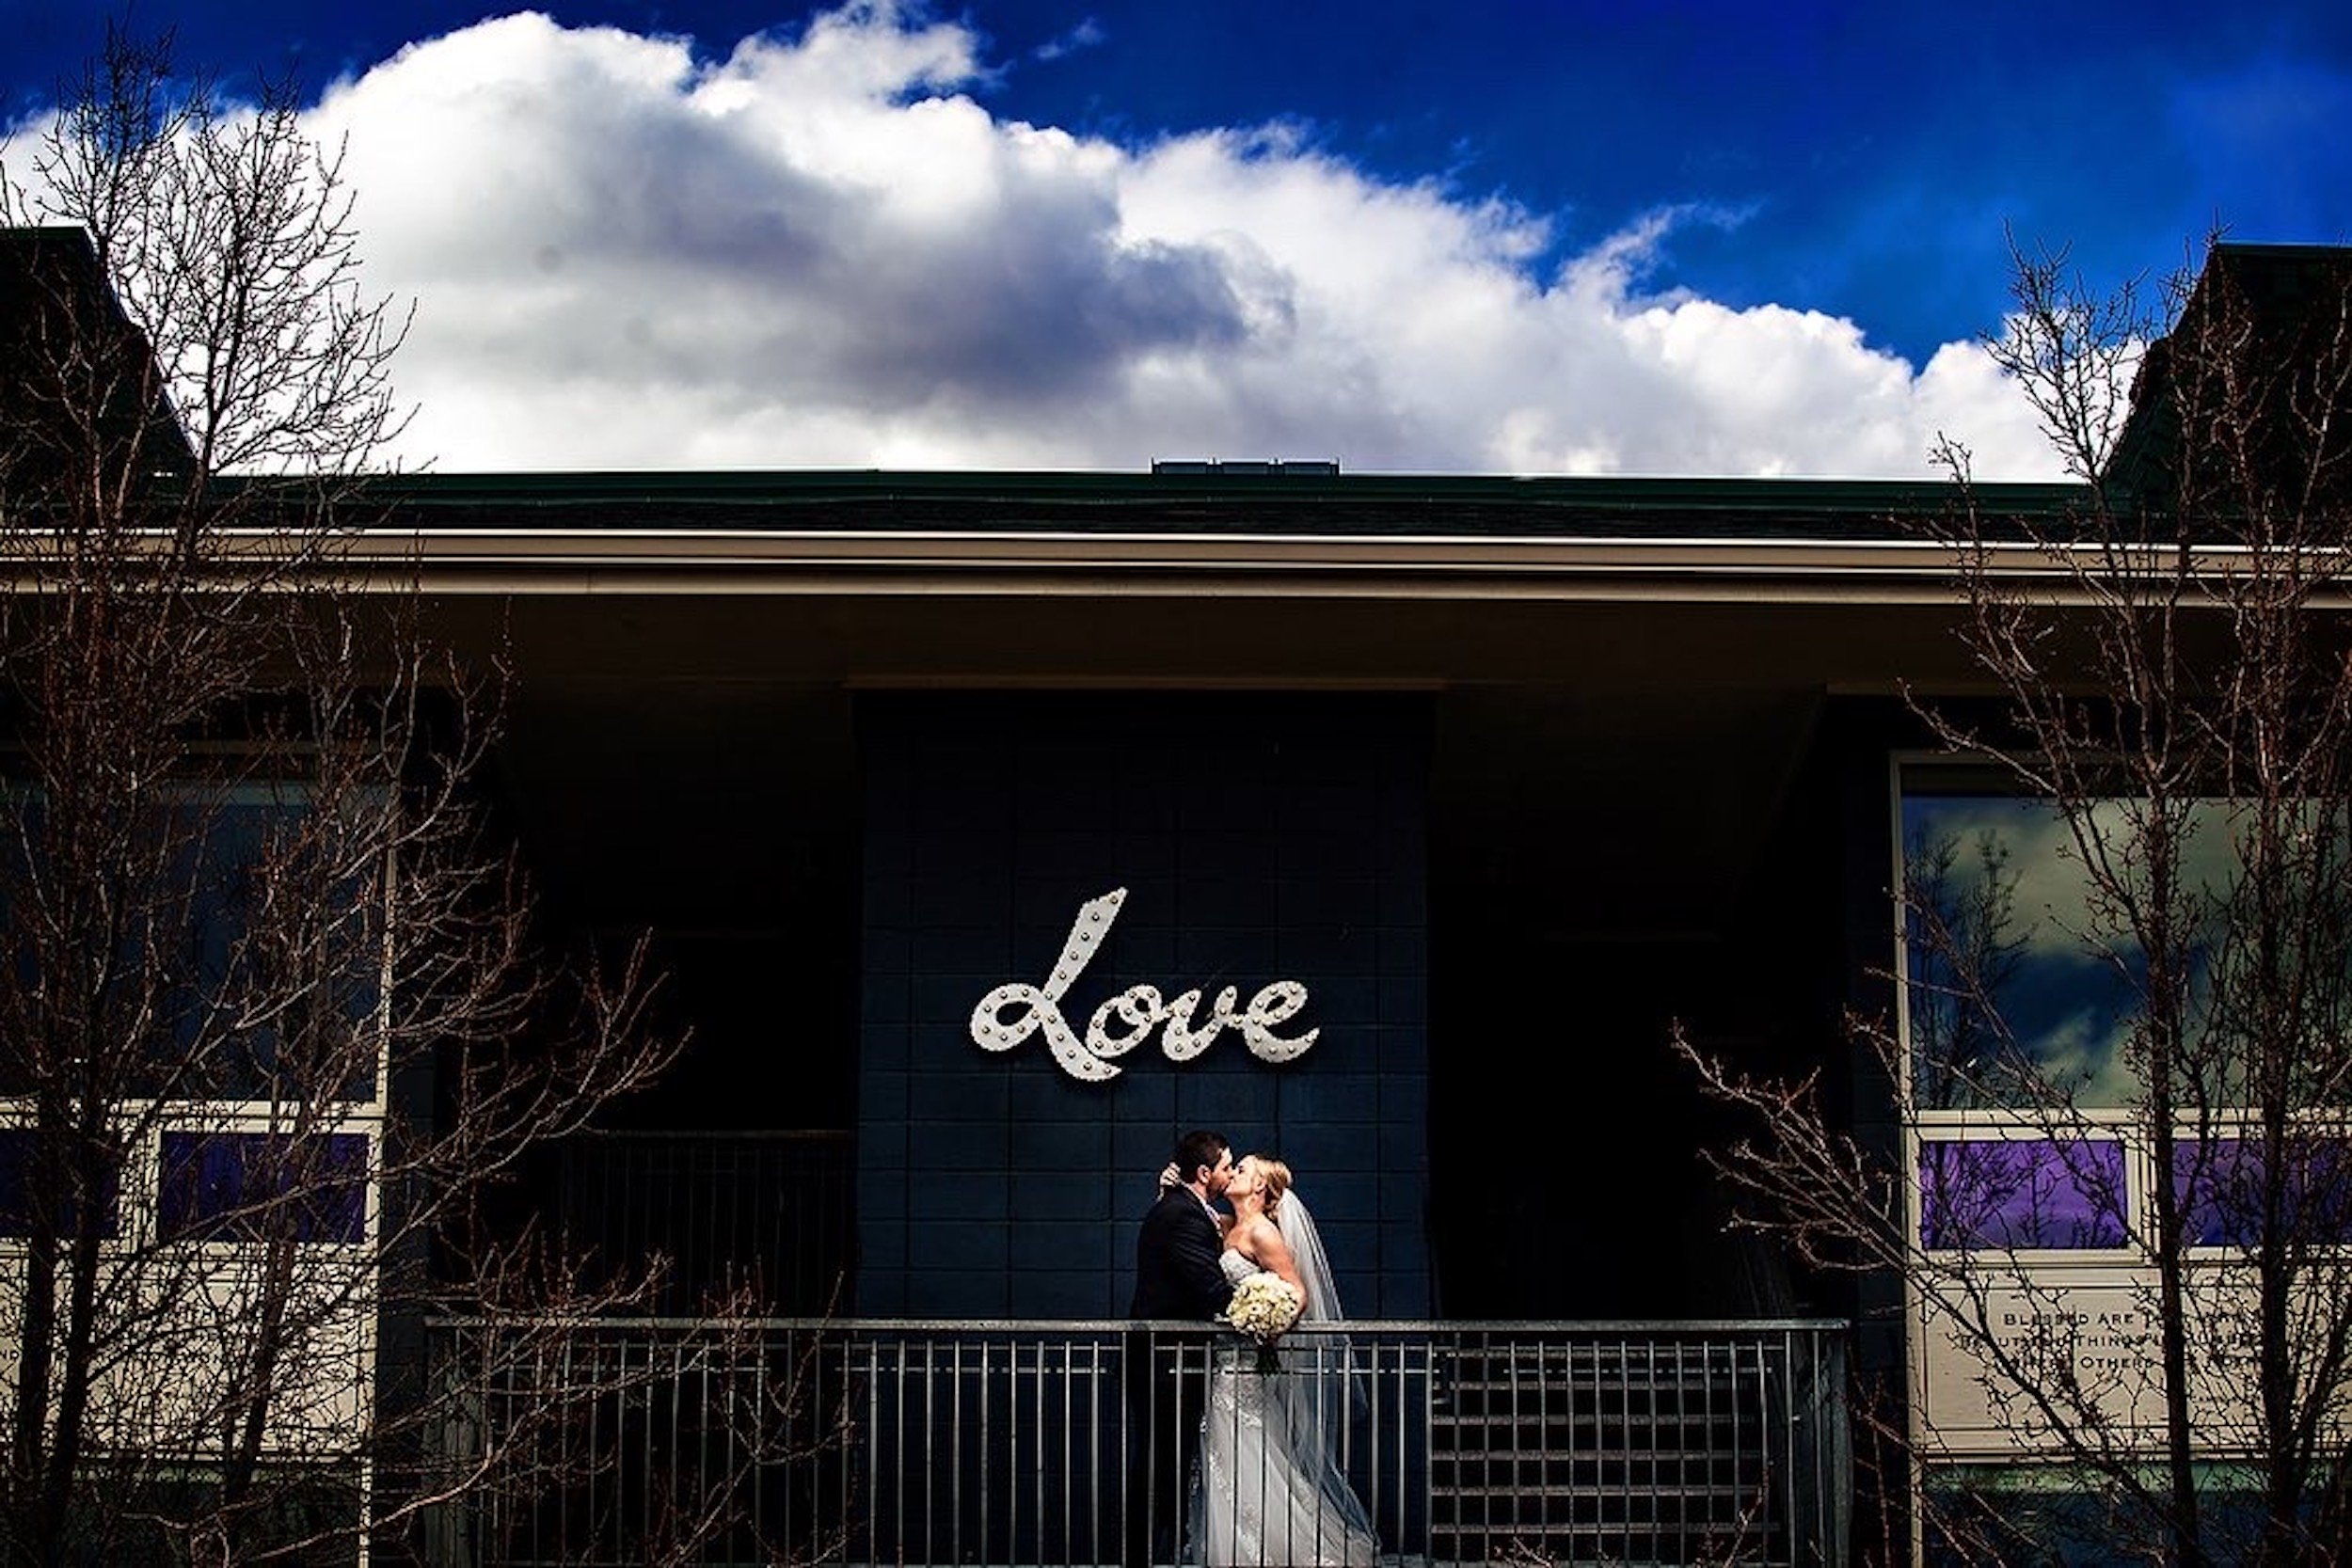 Jeff_Tisman_Wedding_Photography_Hunter_Sydney_Newly_Married_Couple_Poses_in_front_of_Hotel_Boulderado_Love_Sign.JPG